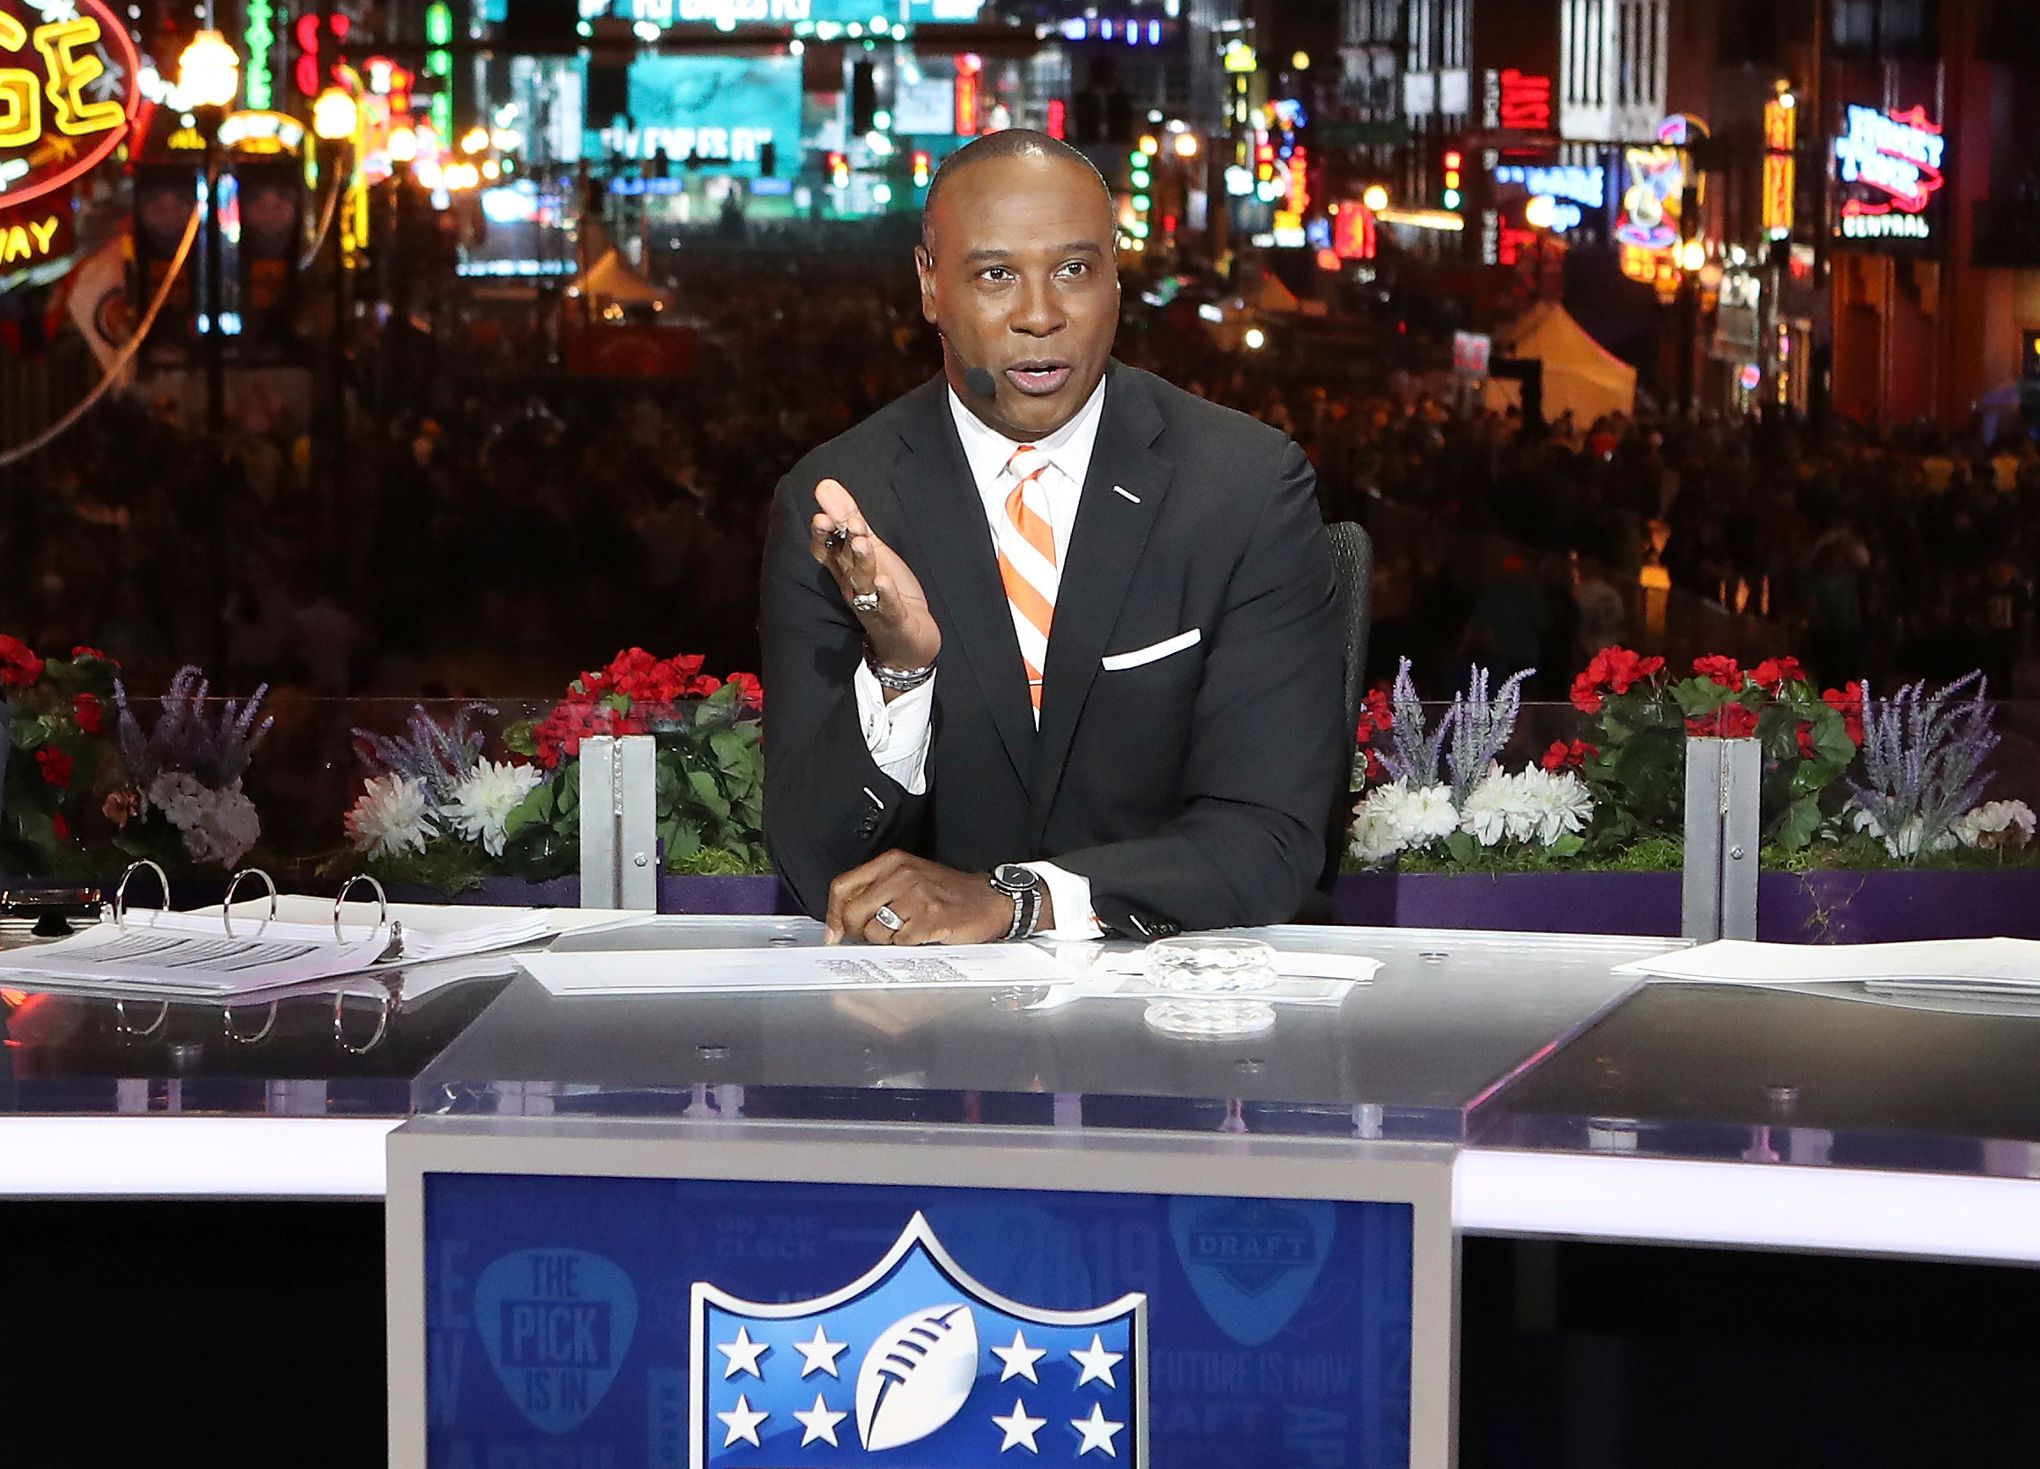 Charles Davis joins CBS as part of its No. 2 NFL crew